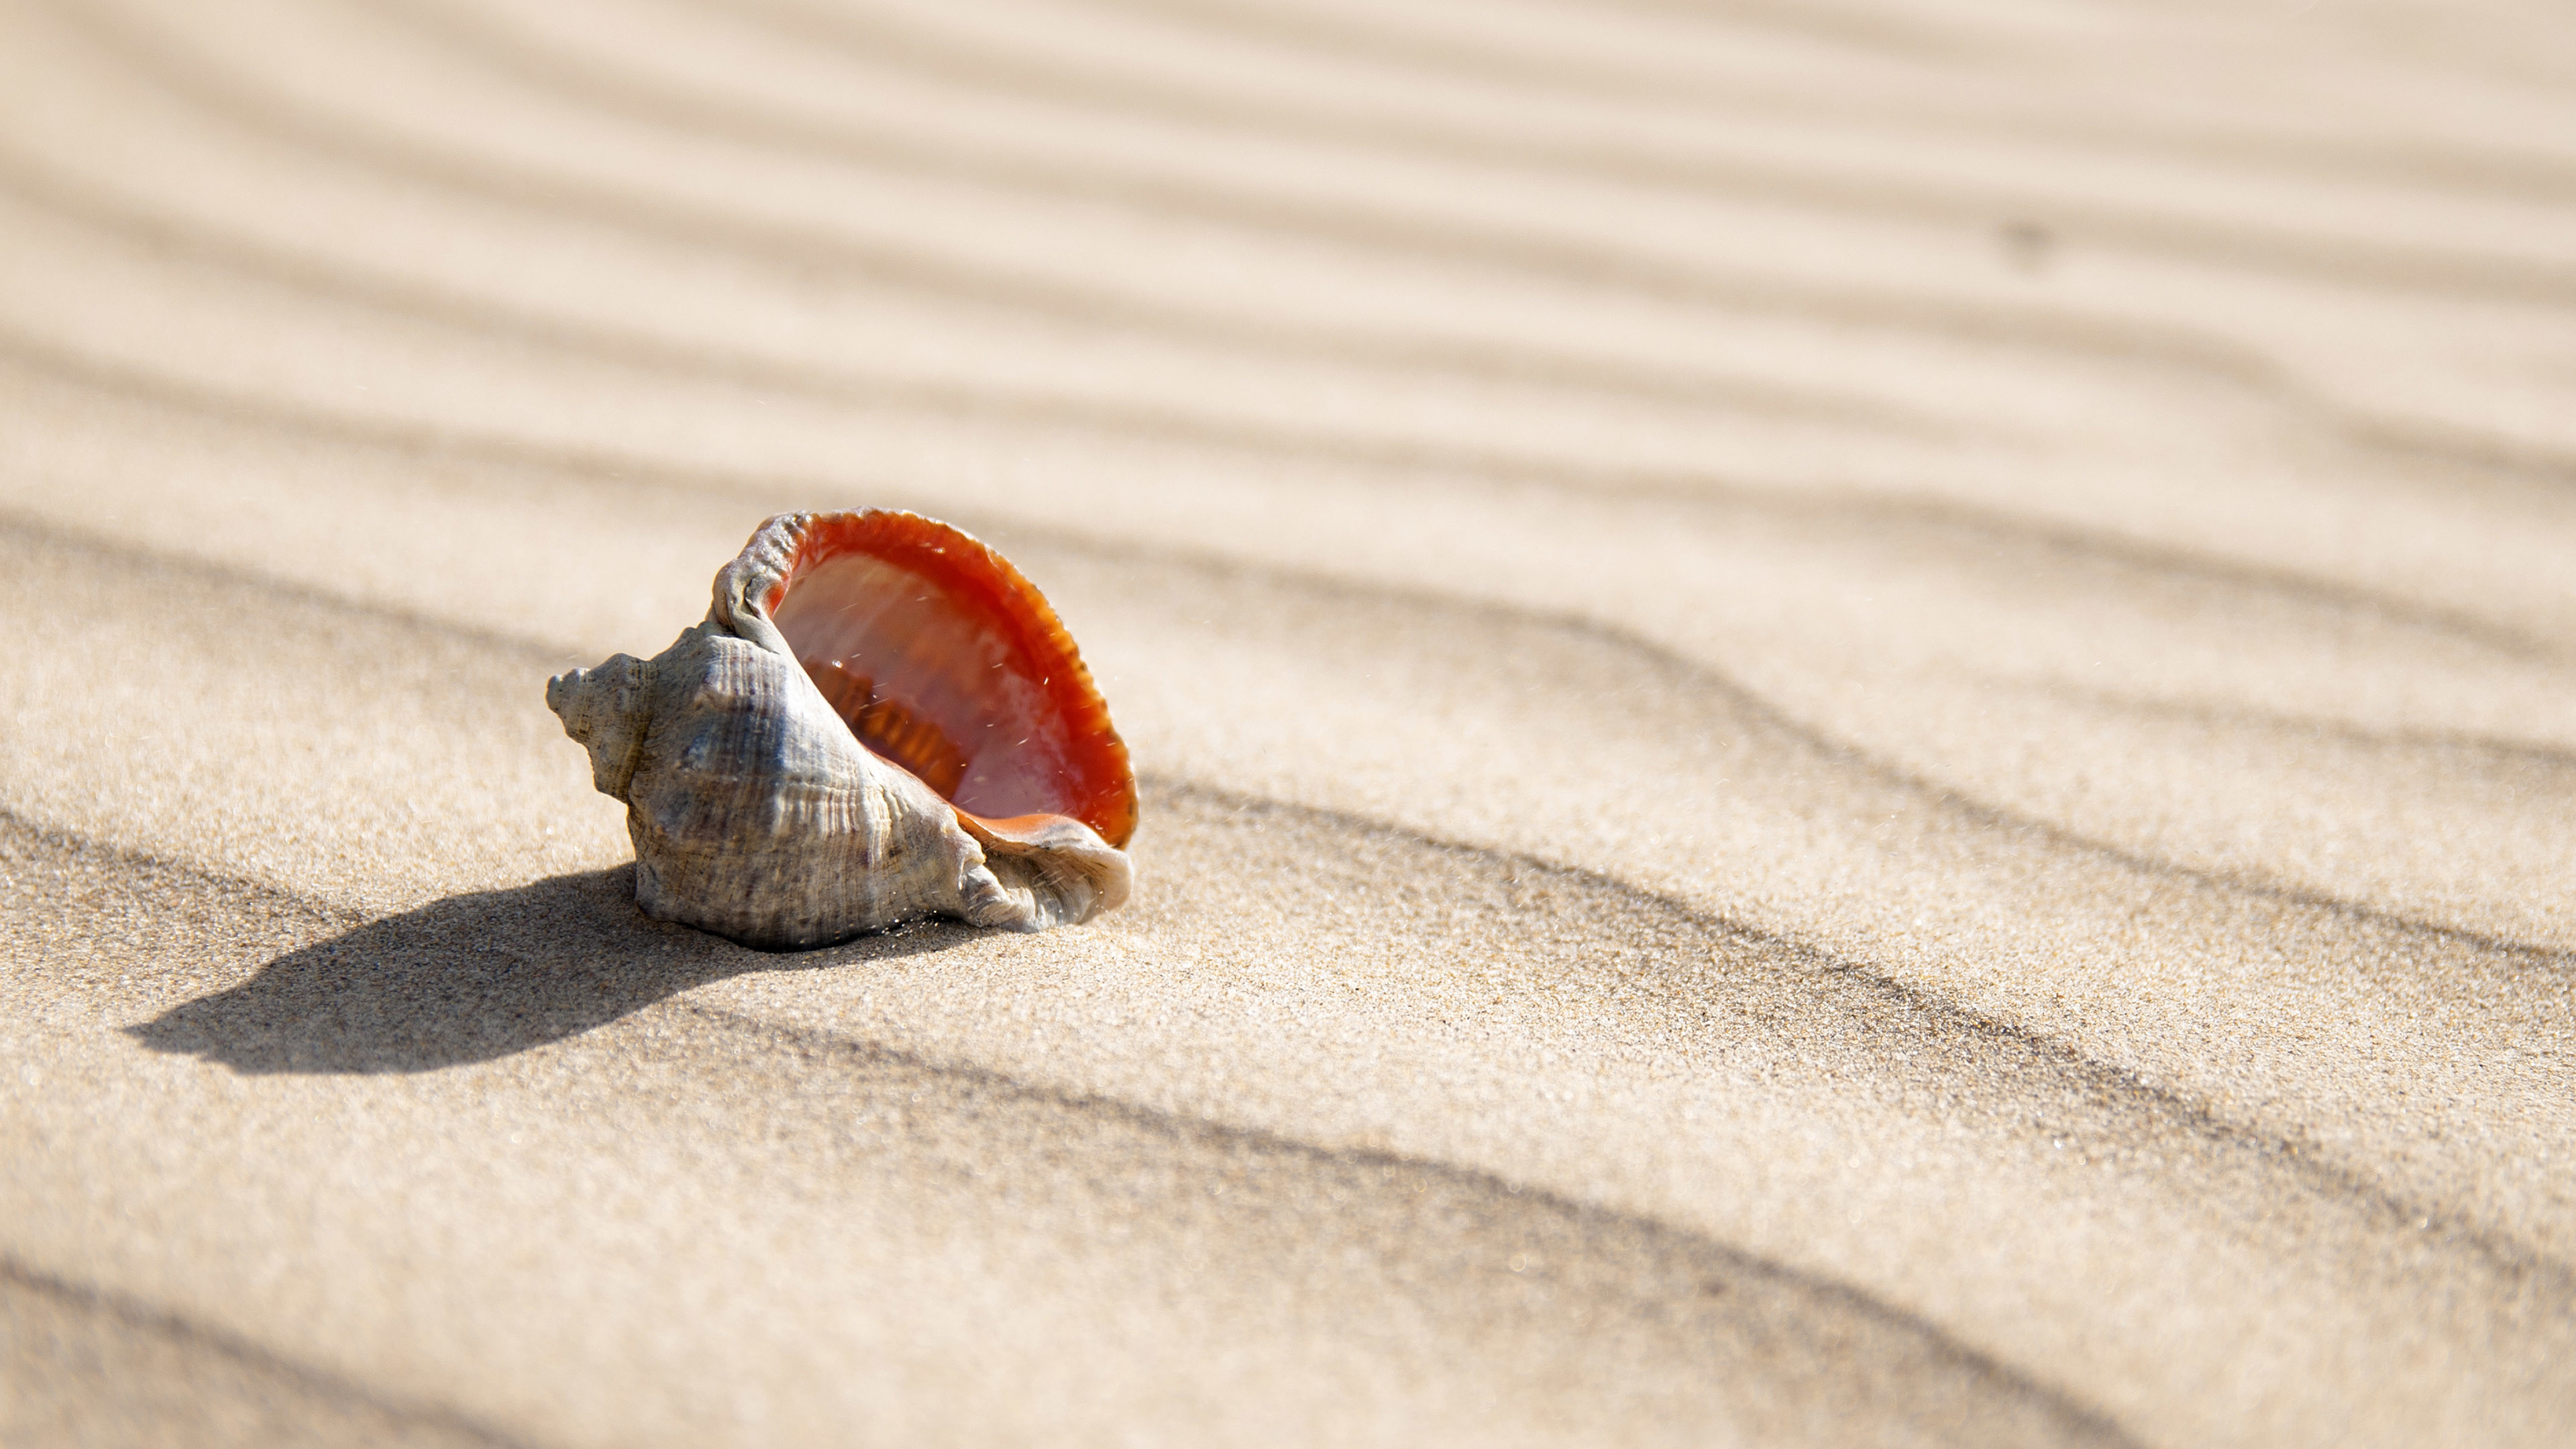 3840x2160 ... Shell in the sand HD Wallpaper 